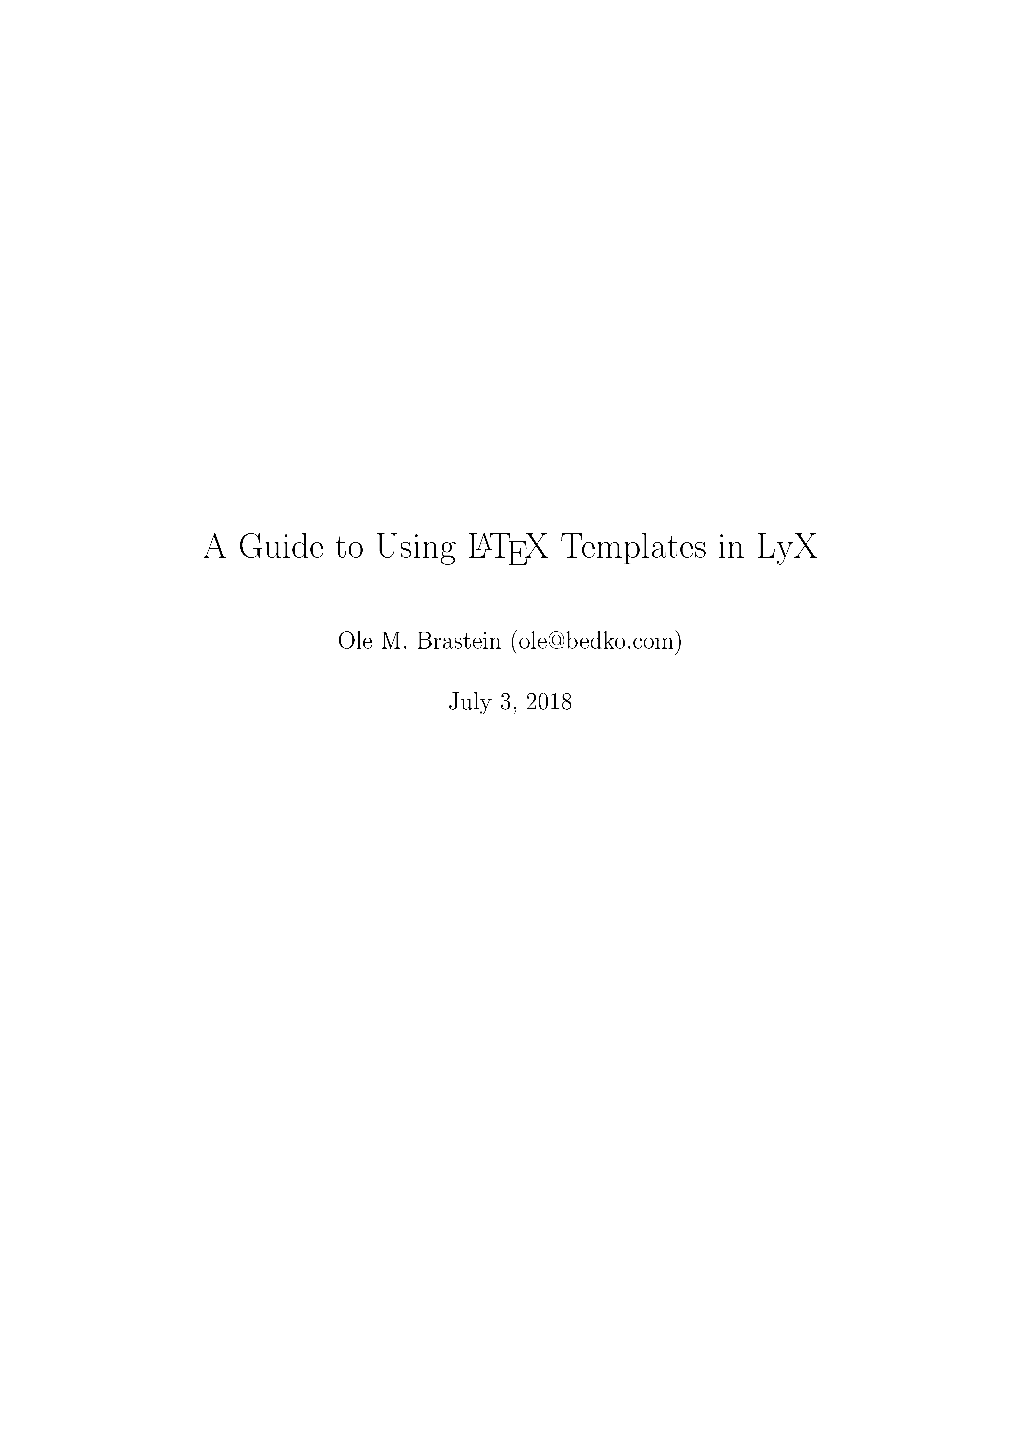 A Guide to Using LATEX Templates in Lyx